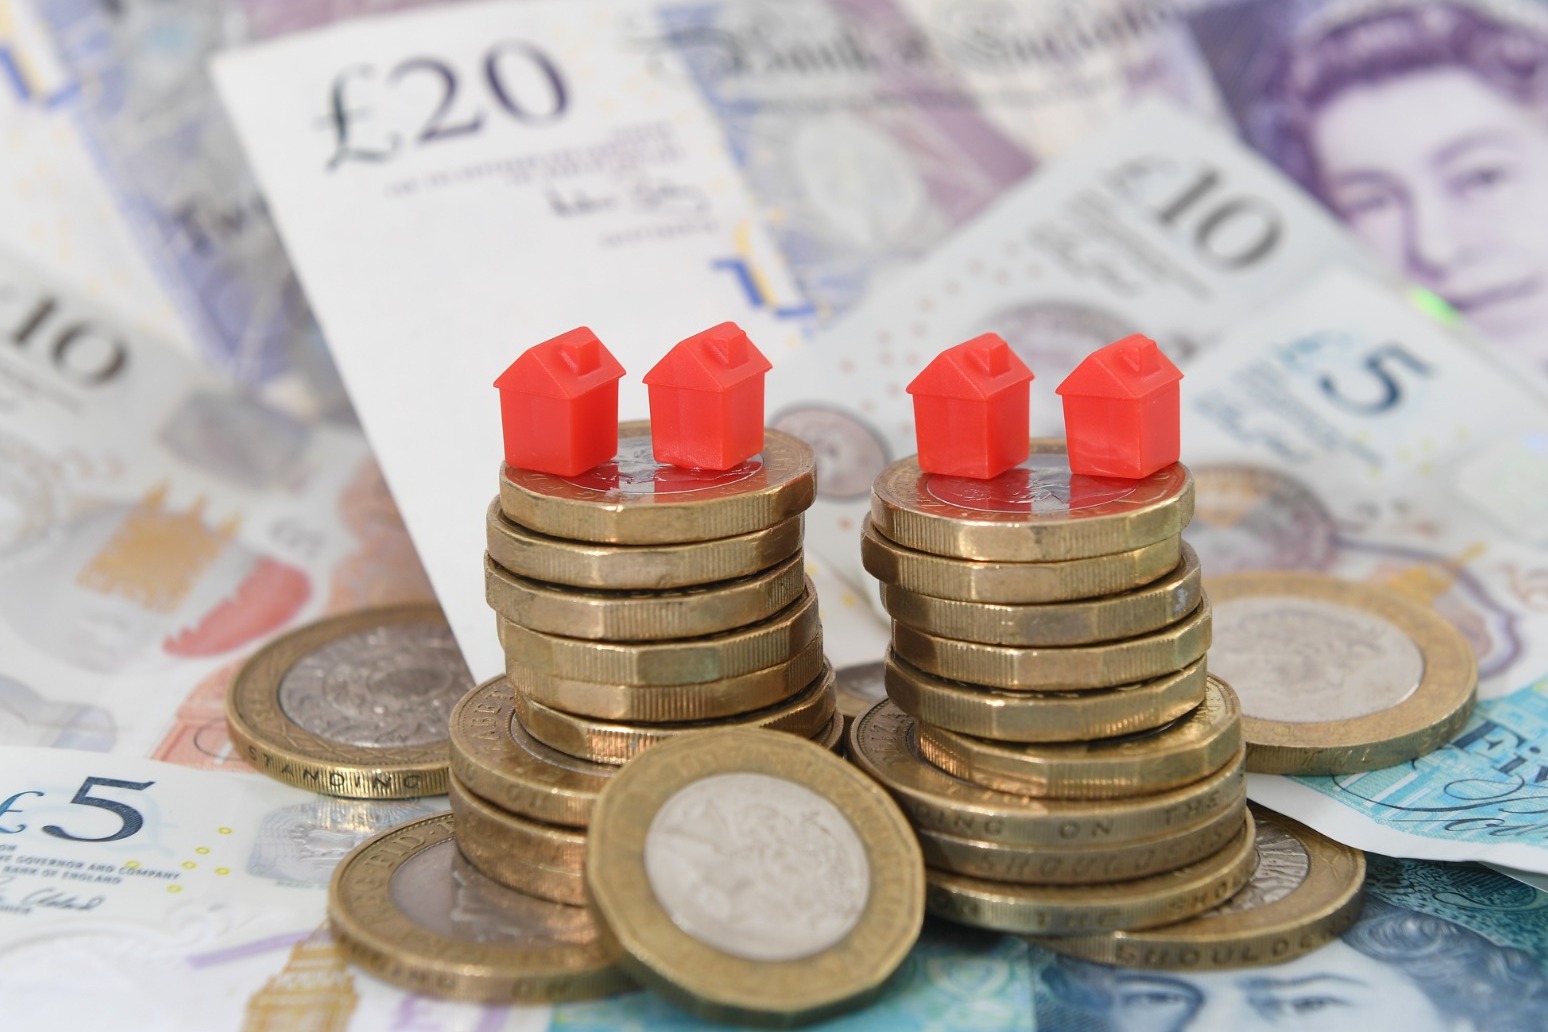 Jump in mortgage arrears and homes being repossessed 